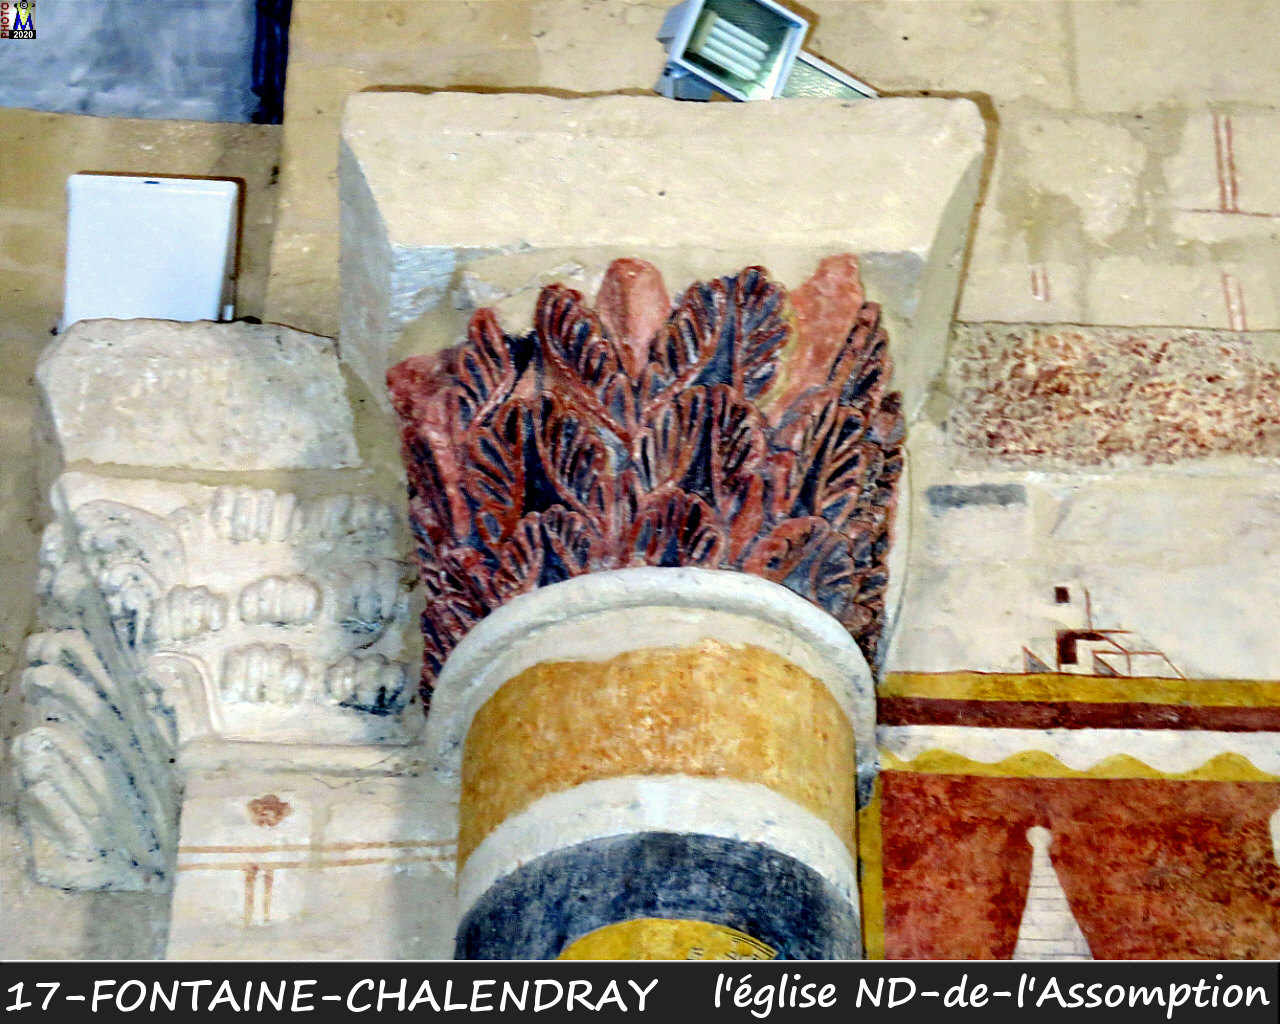 17FONTAINE-CHALENDRAY_eglise_1110.jpg